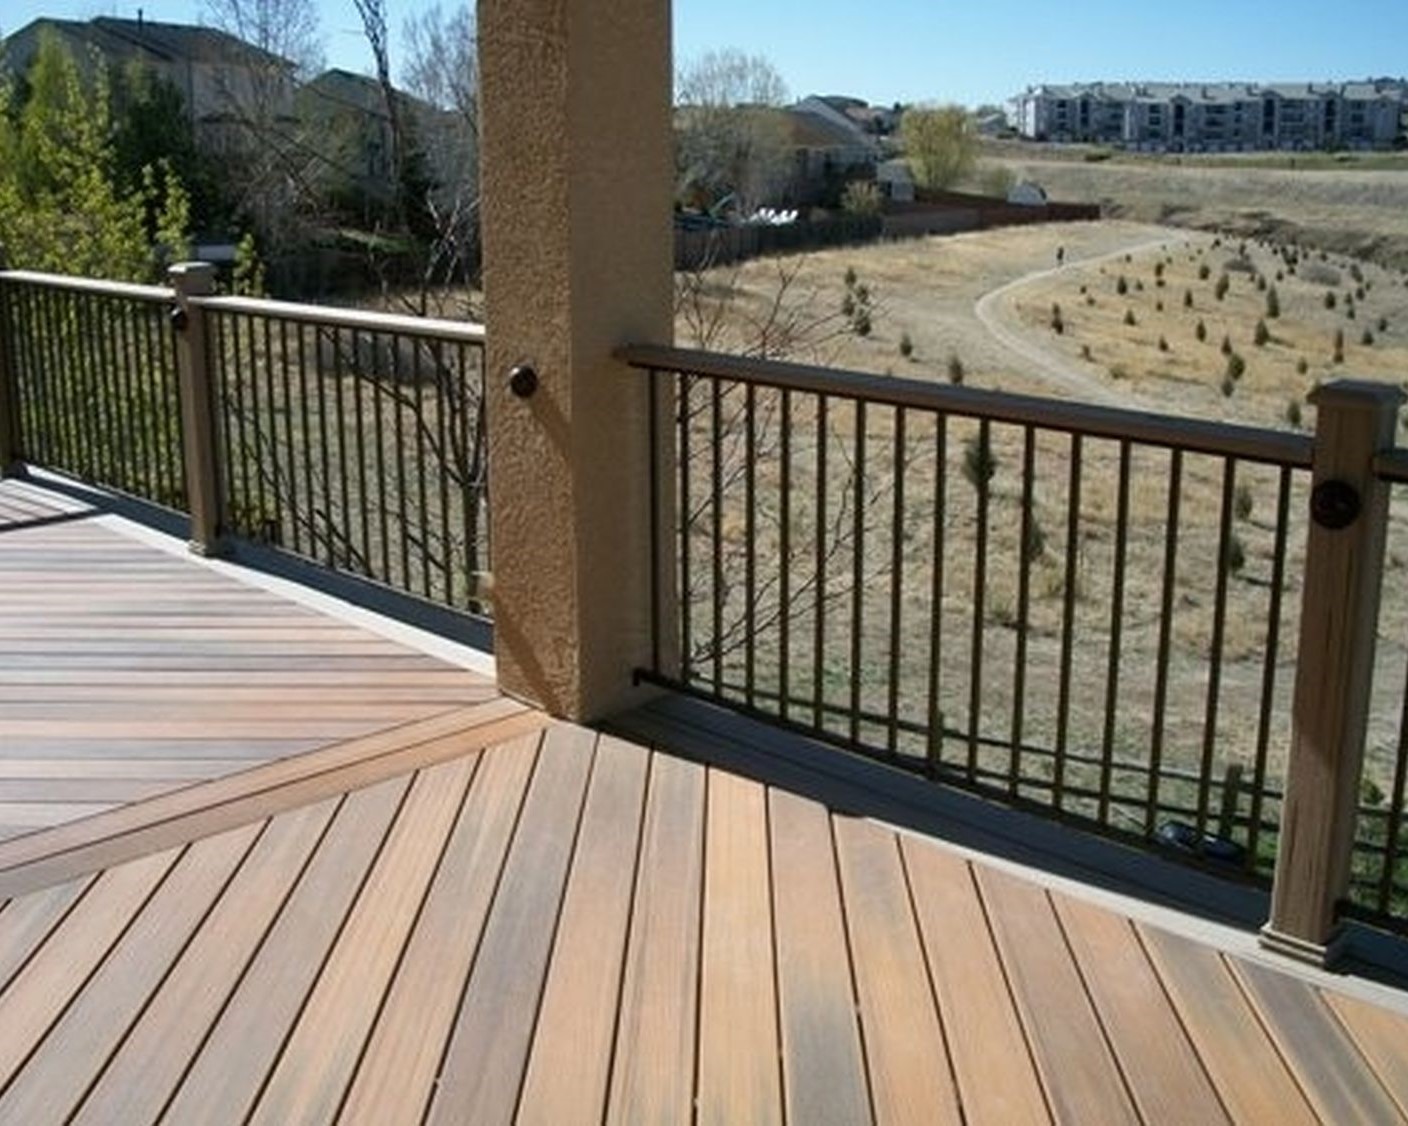 Elevated composite deck with a herringbone design and double divider board. There is also a double picture frame border in a contrasting color.